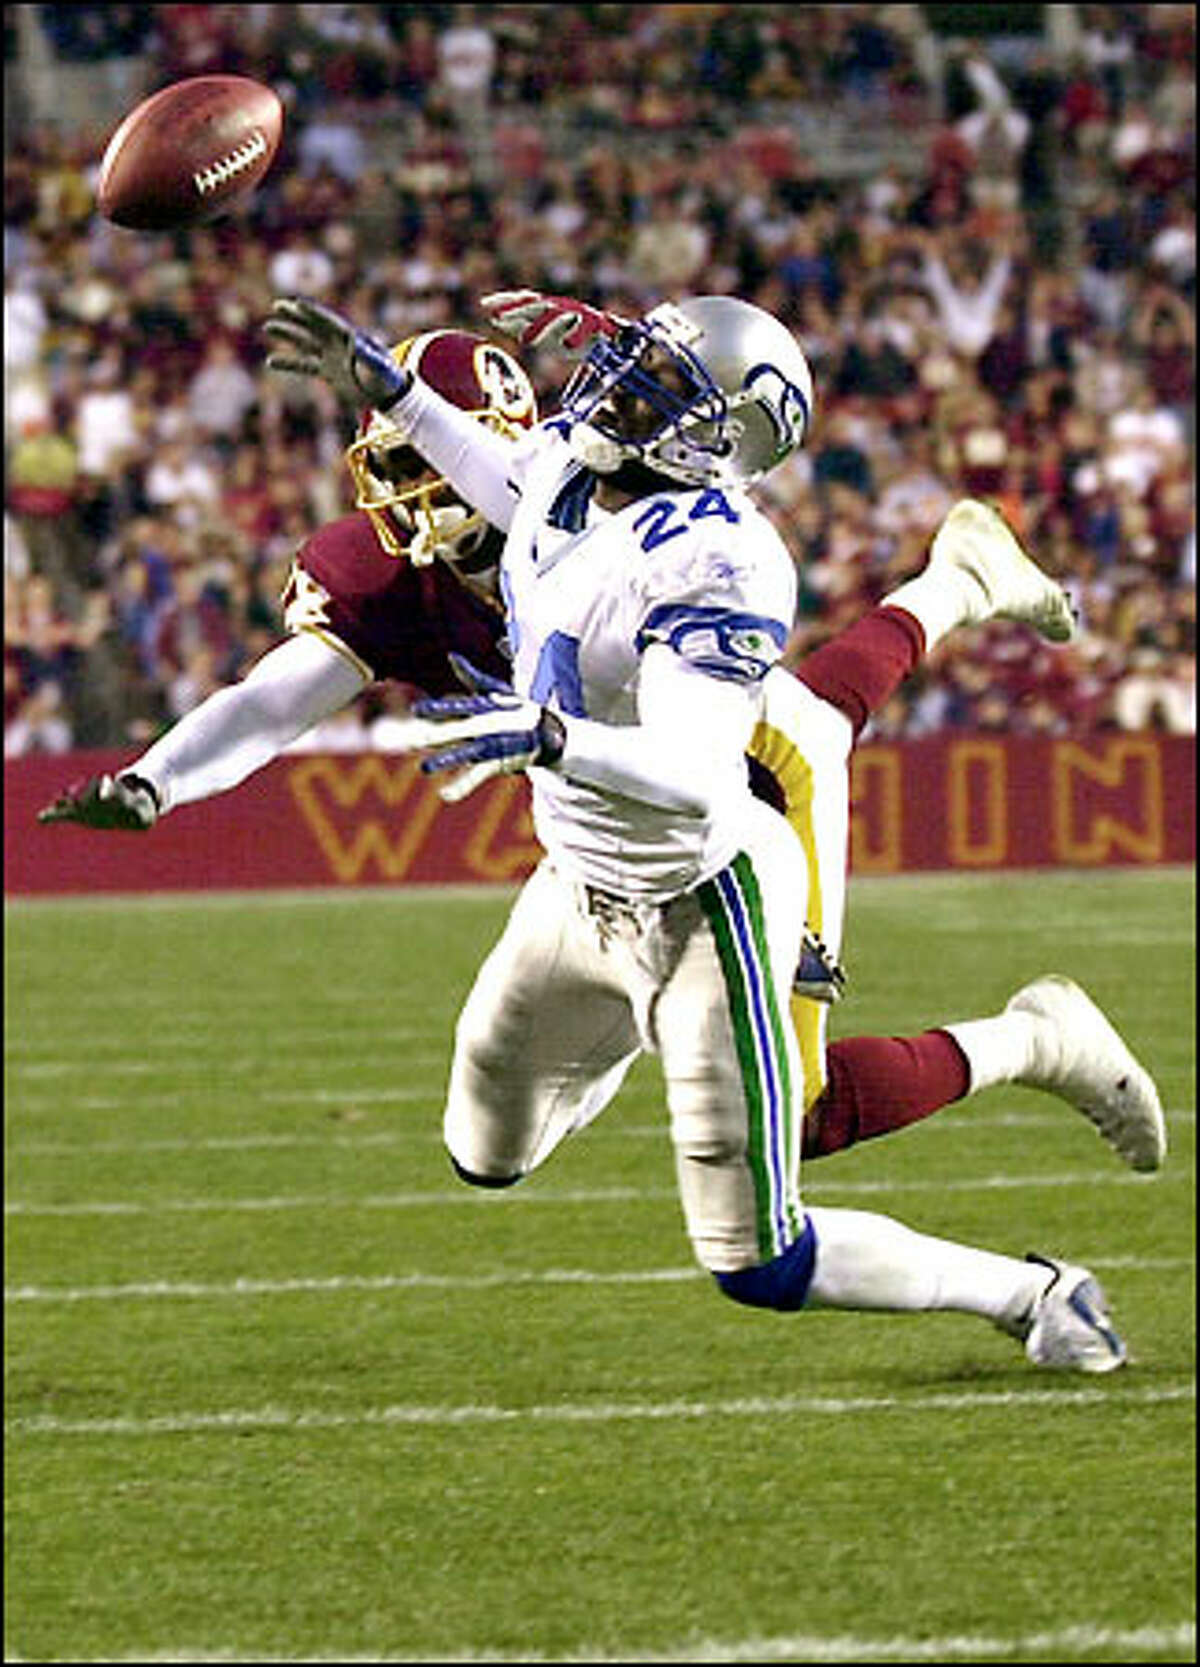 Seahawks cornerback Shawn Springs gets tangled up with Redskins wide receiver Derrius Thompson to break up a second-quarter pass.